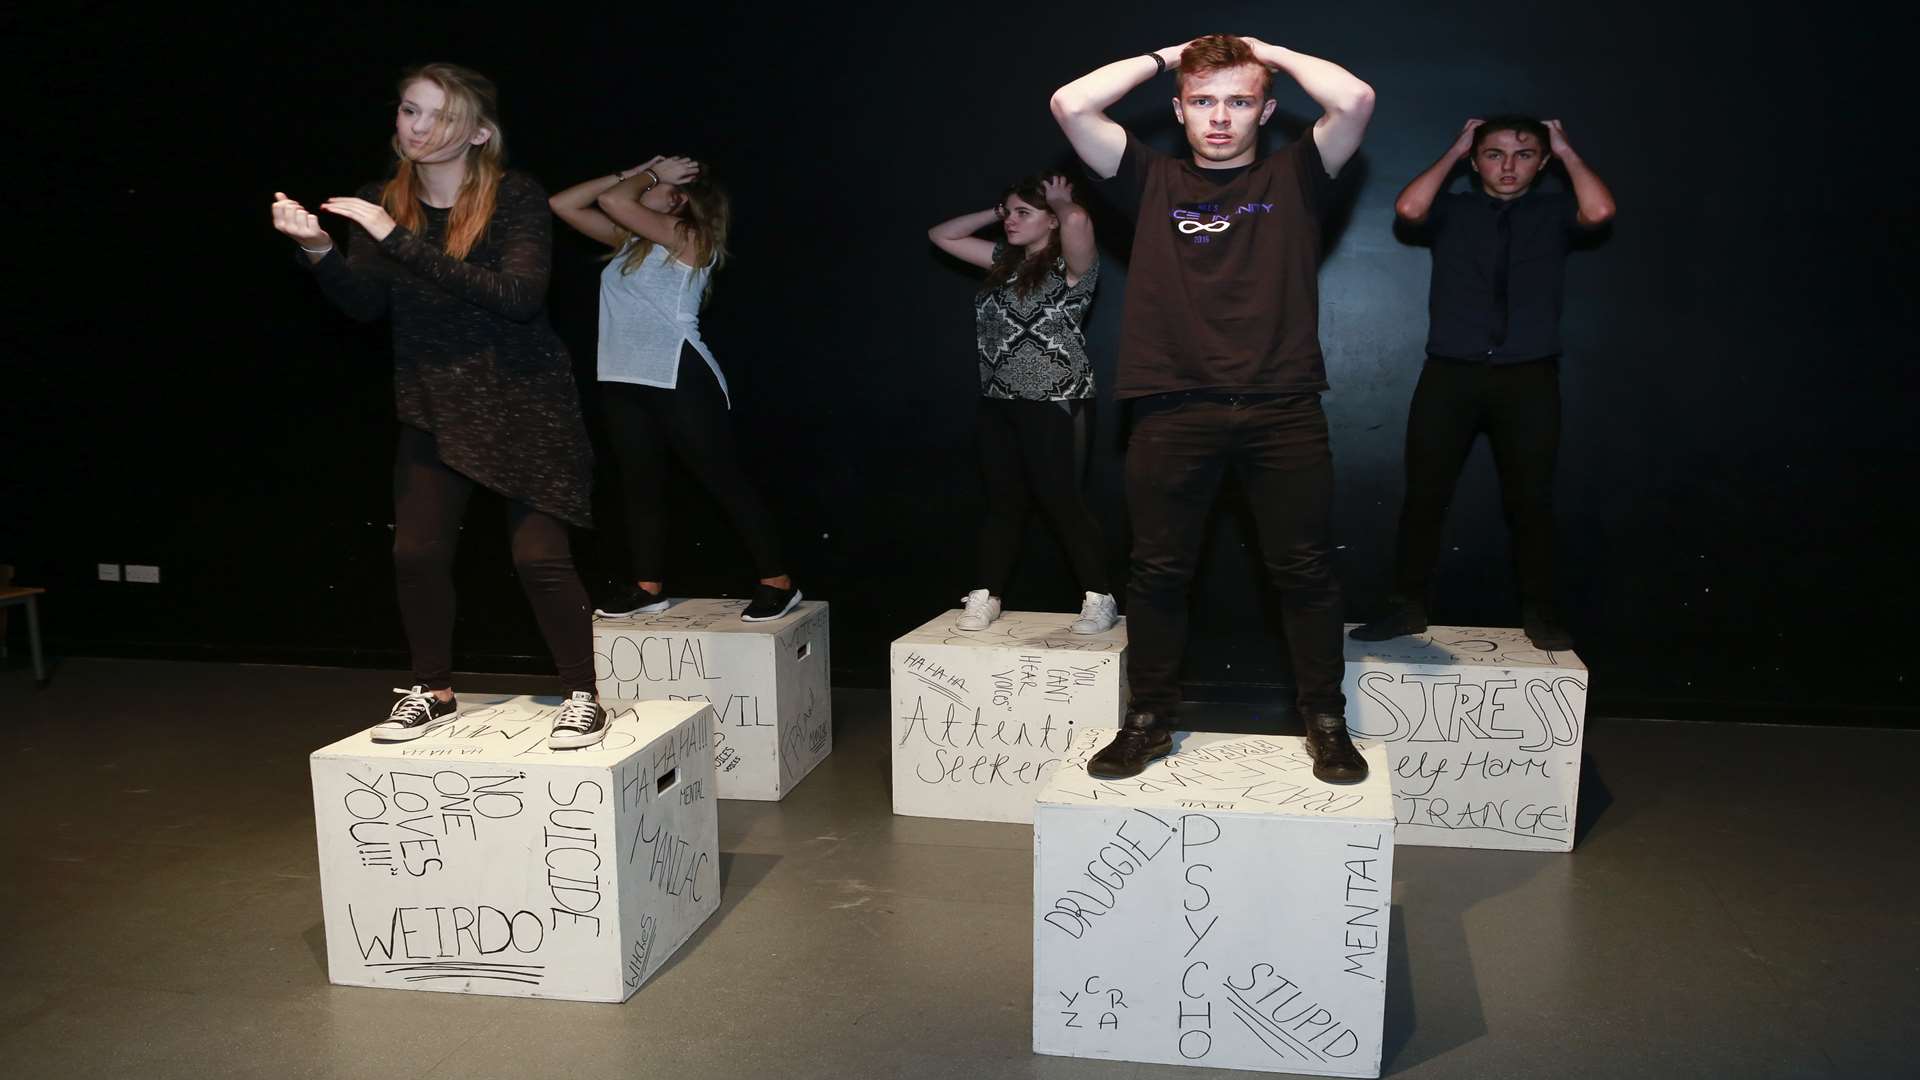 Year 13 students perform their piece about mental health